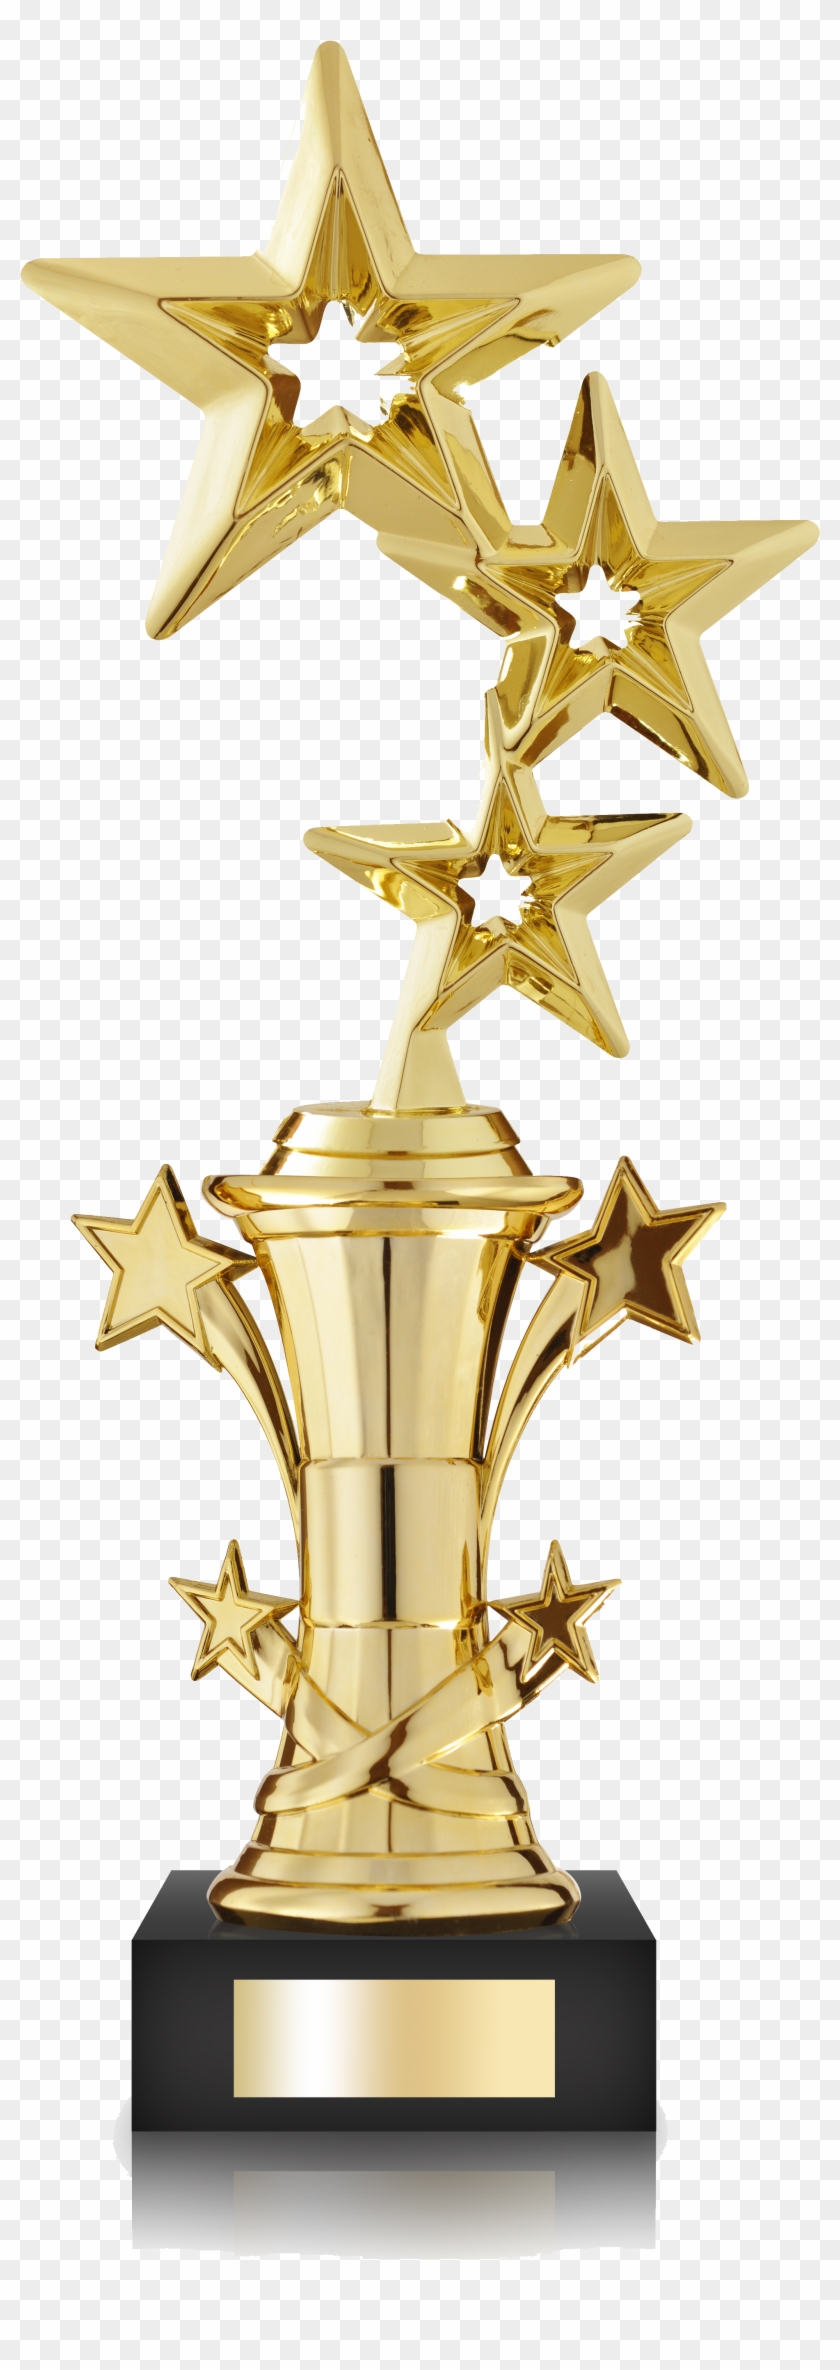 Gold Trophy With Multiple Stars - Transparent Star Trophy Png #610955